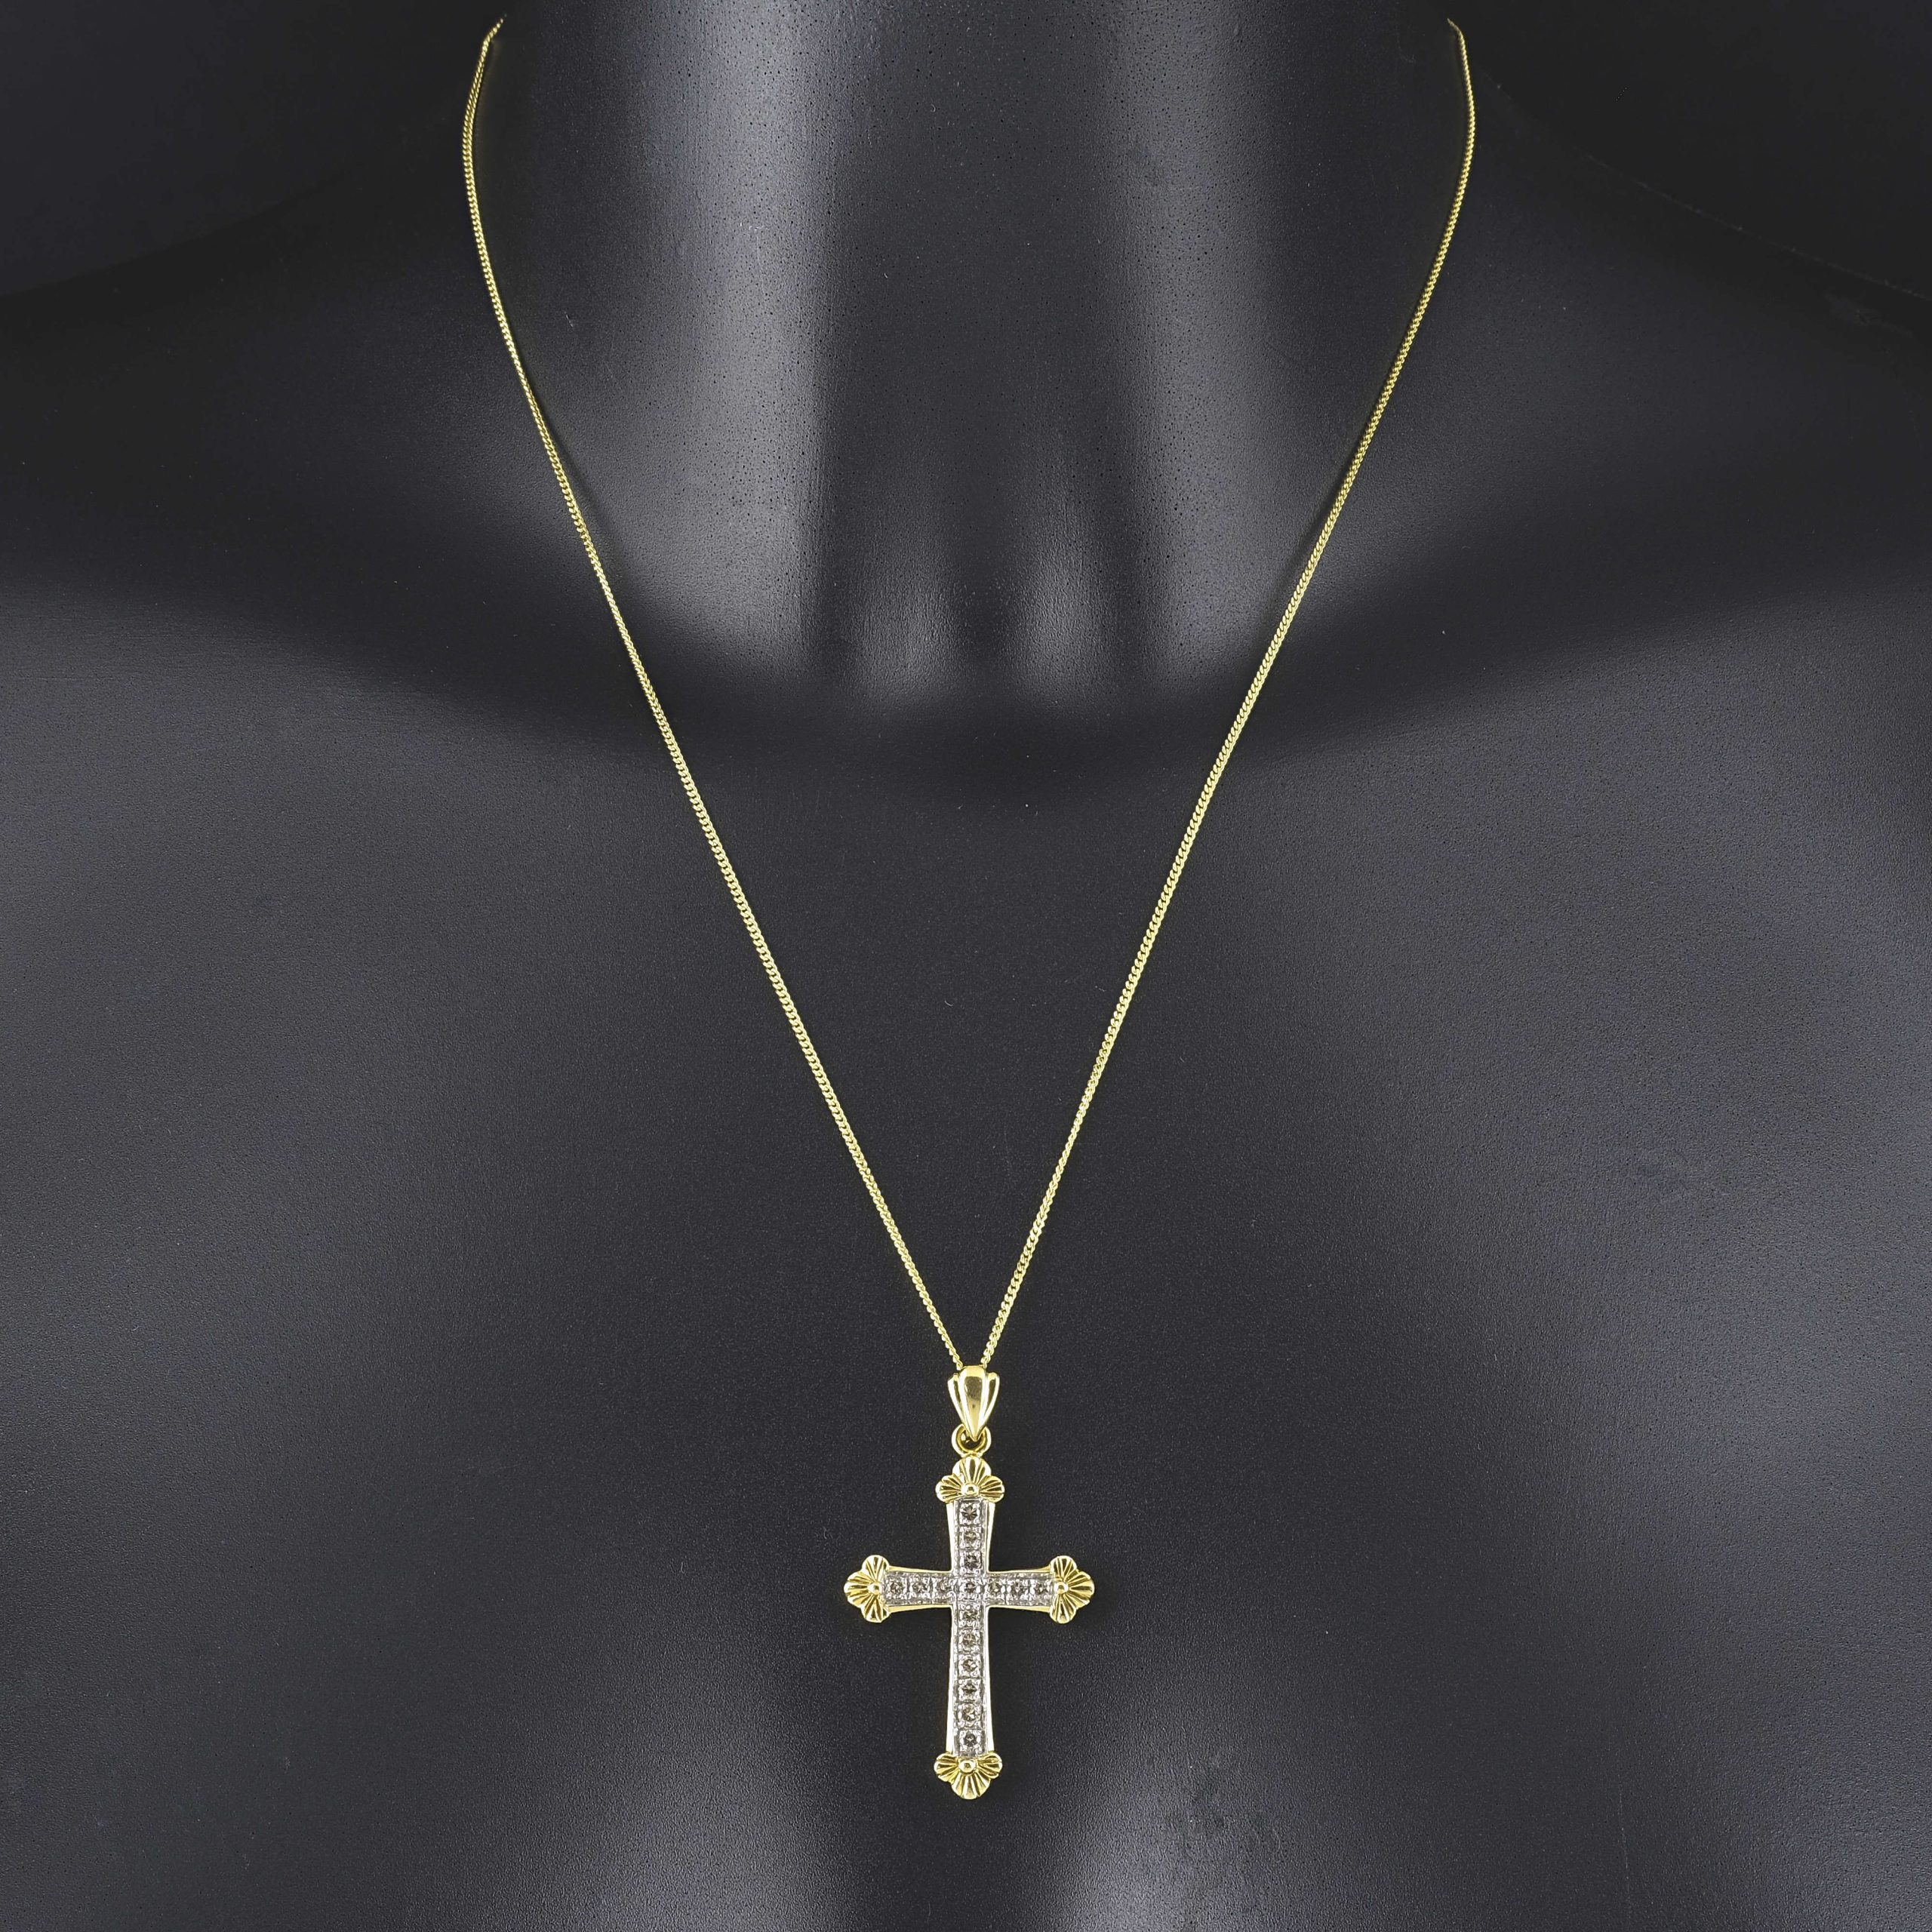 Amazon.com: TGDJ 14k Yellow Gold Religious Cross Pendant with 1mm Snail  Link Chain Necklace (16.0): Clothing, Shoes & Jewelry